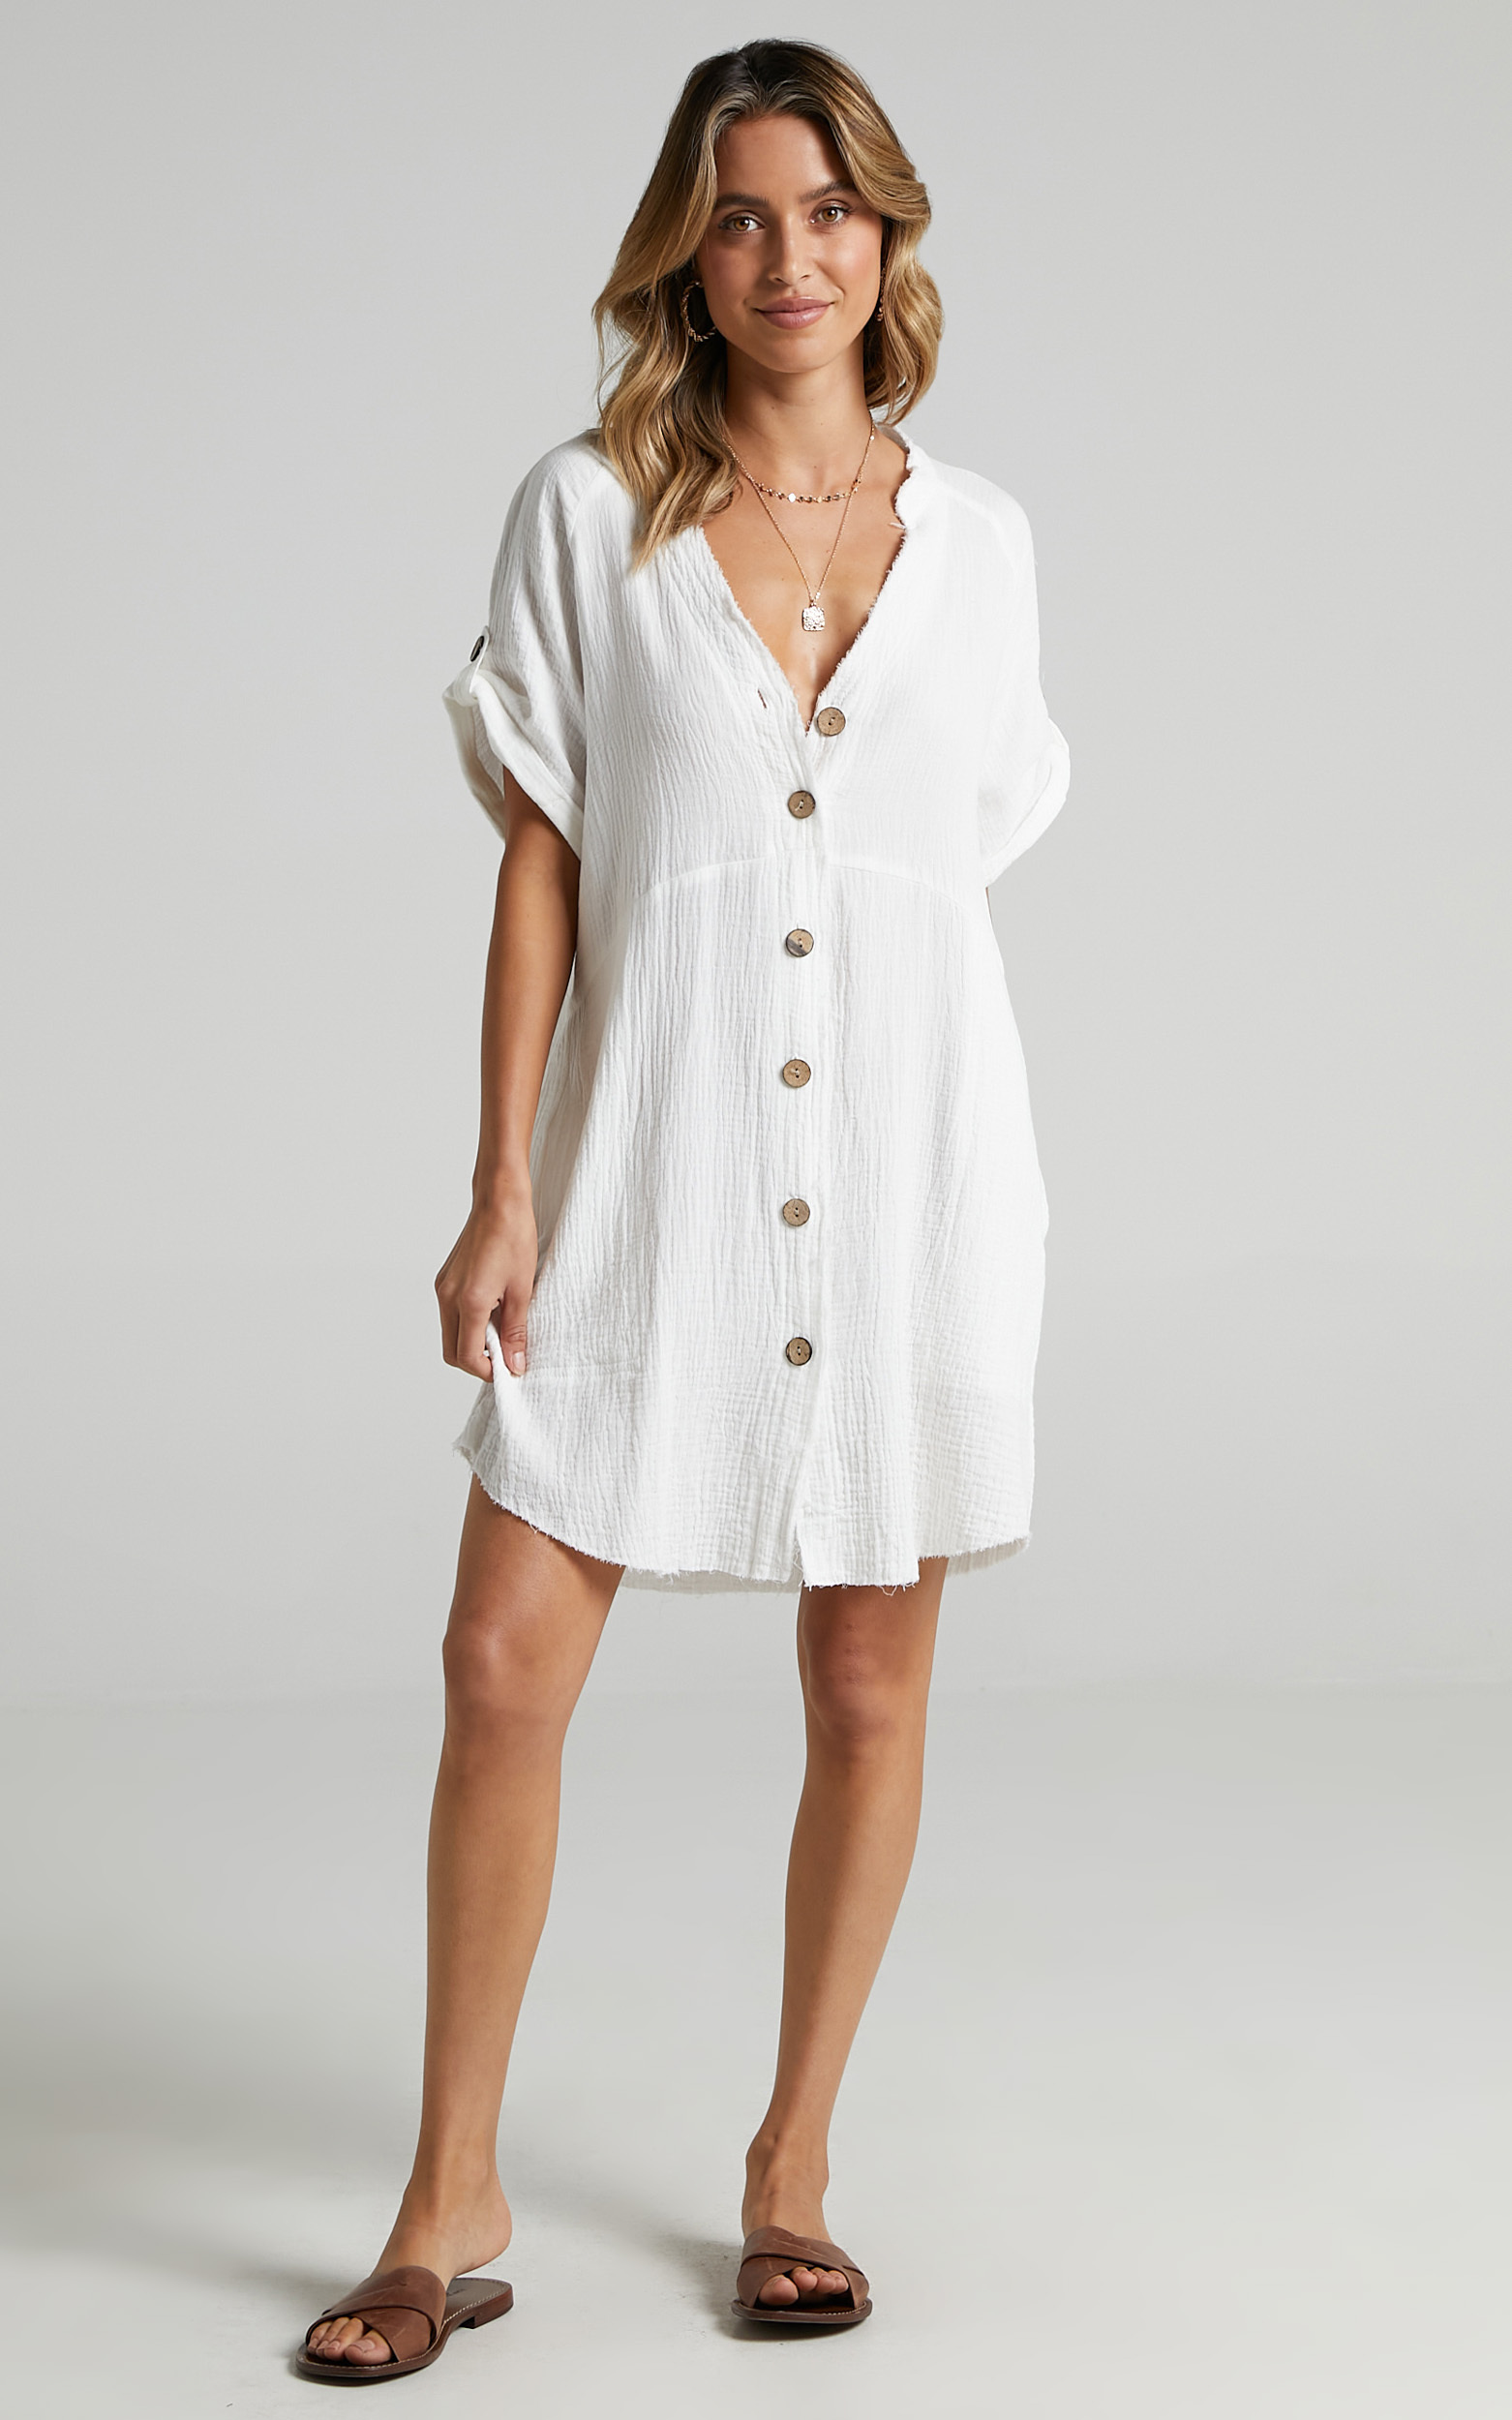 Rosalind Button Through Dress in White - S/M, WHT2, hi-res image number null